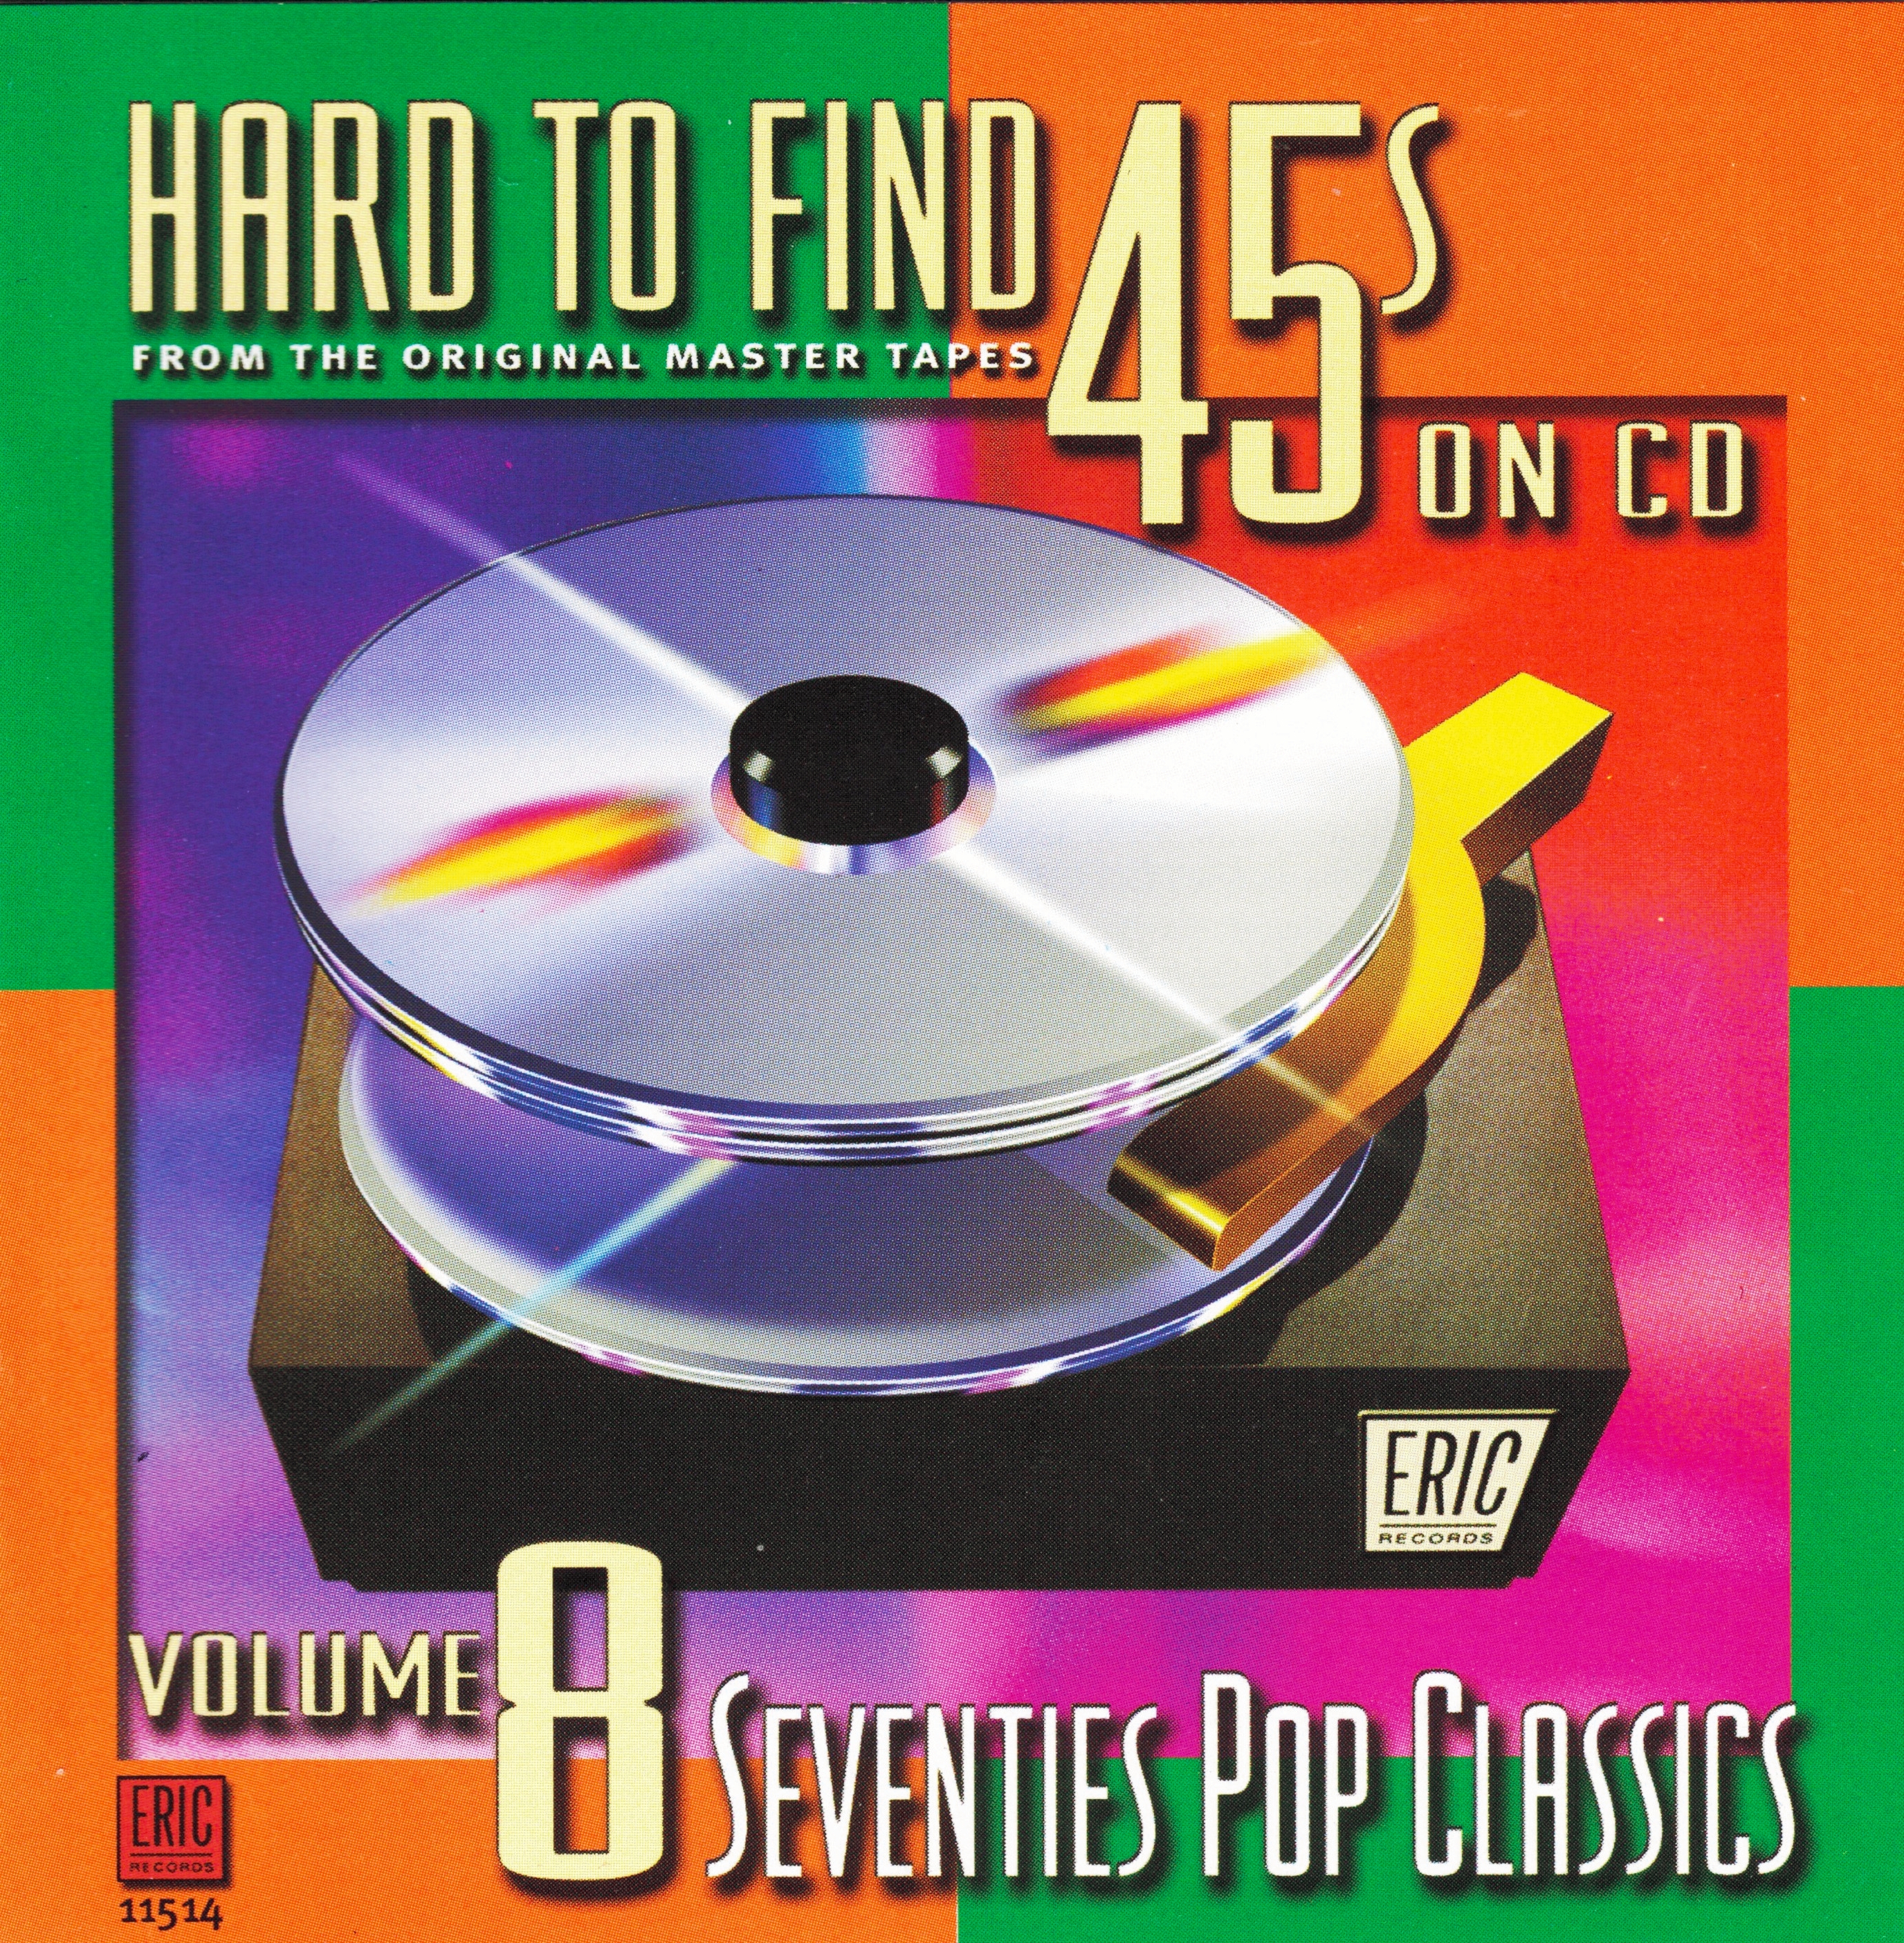 Hard To Find 45s on CD Volume 8: Seventies Pop Classics